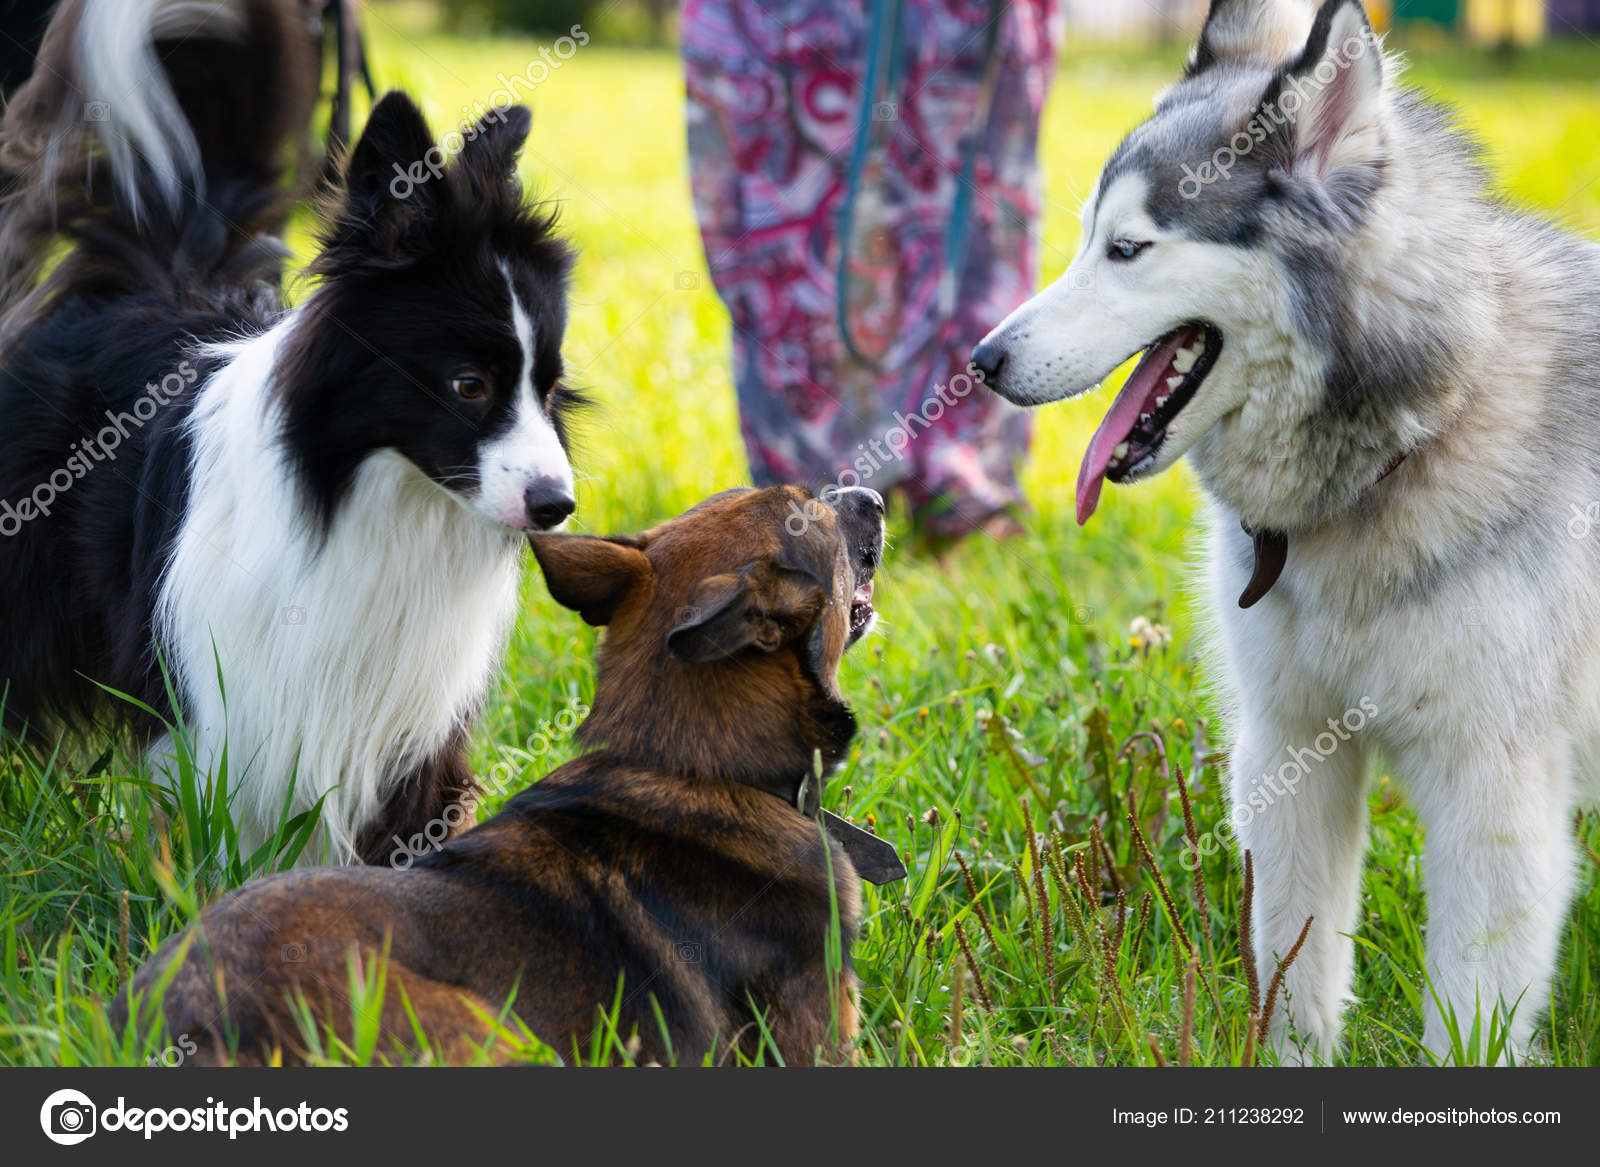 Pictures Border Collie Husky Mix Dogs Play Each Other Siberian Husky Border Collie Merry Fuss Stock Photo C Taisyakorchak